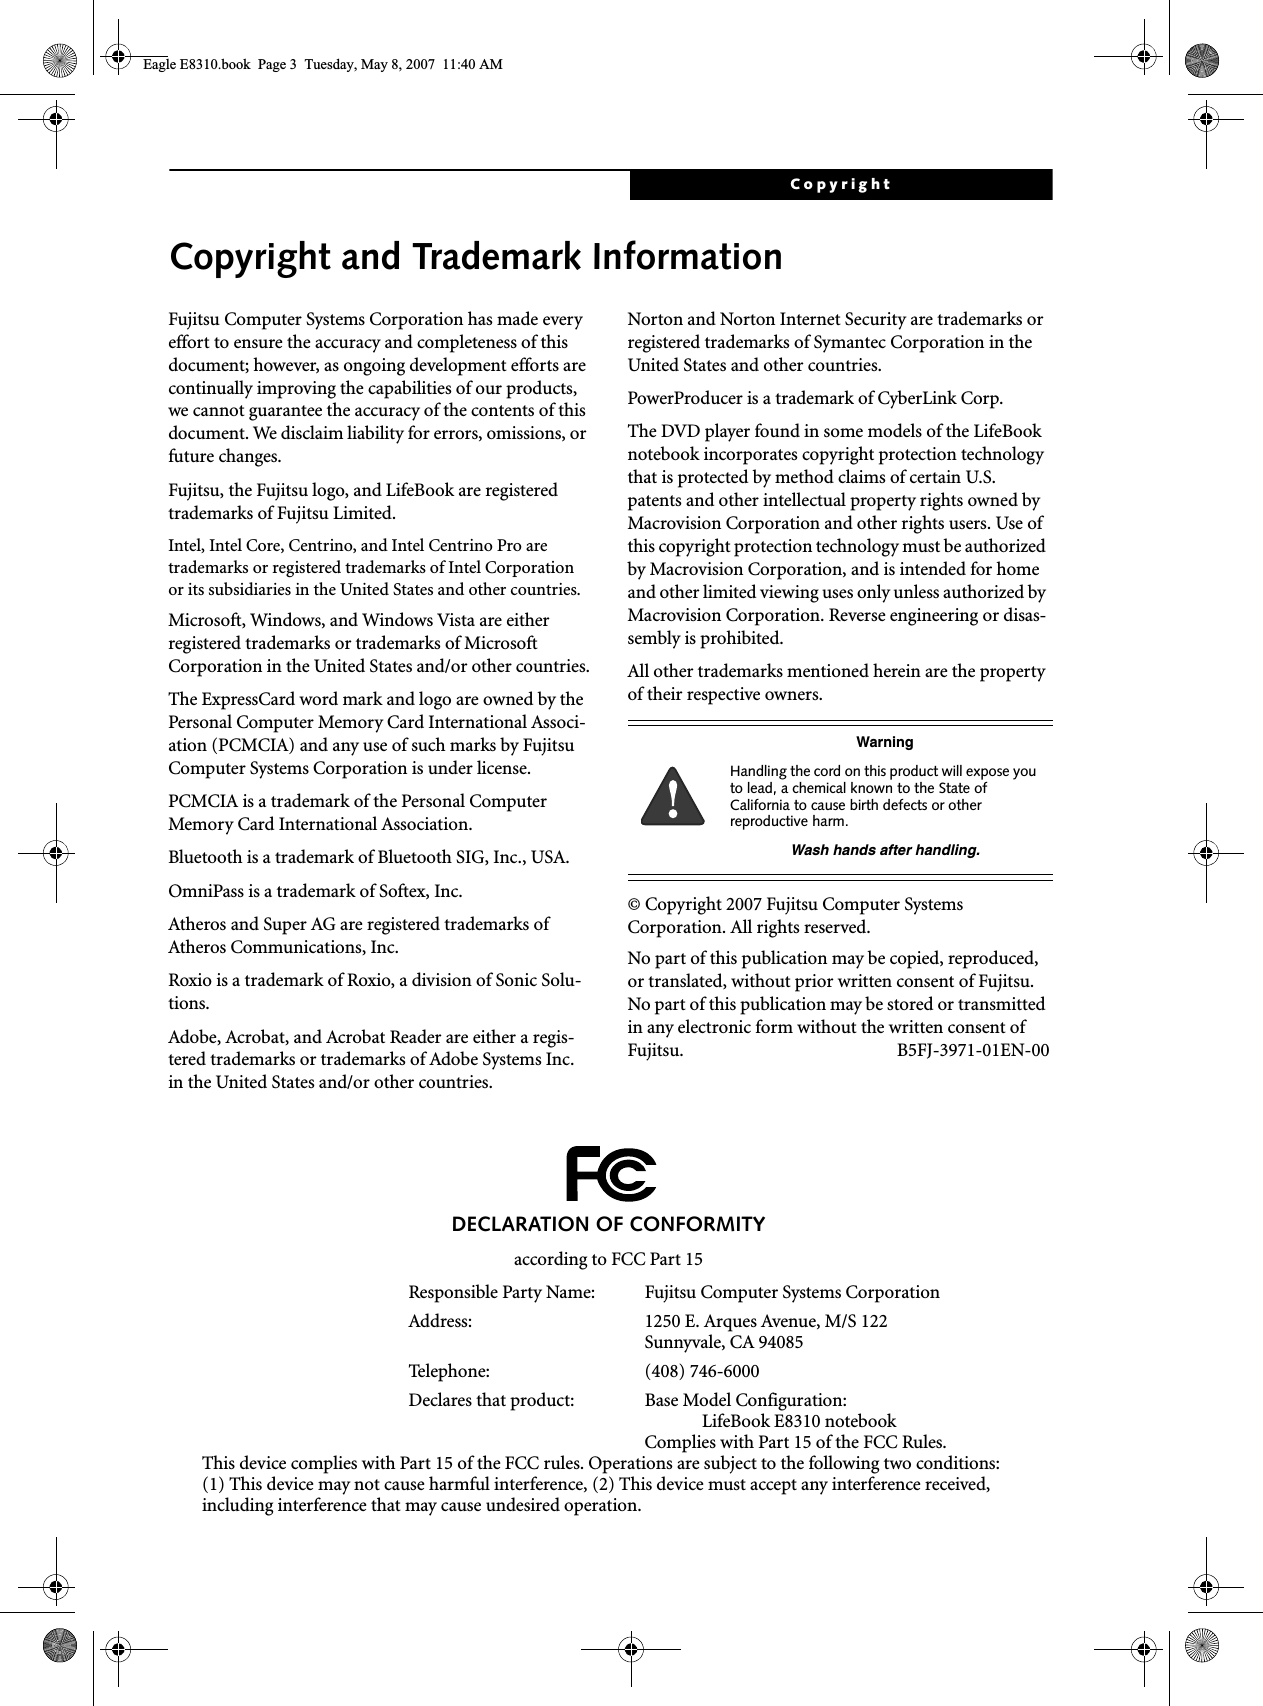 CopyrightCopyright and Trademark InformationFujitsu Computer Systems Corporation has made every effort to ensure the accuracy and completeness of this document; however, as ongoing development efforts are continually improving the capabilities of our products, we cannot guarantee the accuracy of the contents of this document. We disclaim liability for errors, omissions, or future changes.Fujitsu, the Fujitsu logo, and LifeBook are registered trademarks of Fujitsu Limited.Intel, Intel Core, Centrino, and Intel Centrino Pro are trademarks or registered trademarks of Intel Corporation or its subsidiaries in the United States and other countries.Microsoft, Windows, and Windows Vista are either registered trademarks or trademarks of Microsoft Corporation in the United States and/or other countries.The ExpressCard word mark and logo are owned by the Personal Computer Memory Card International Associ-ation (PCMCIA) and any use of such marks by Fujitsu Computer Systems Corporation is under license. PCMCIA is a trademark of the Personal Computer Memory Card International Association.Bluetooth is a trademark of Bluetooth SIG, Inc., USA.OmniPass is a trademark of Softex, Inc.Atheros and Super AG are registered trademarks of Atheros Communications, Inc.Roxio is a trademark of Roxio, a division of Sonic Solu-tions.Adobe, Acrobat, and Acrobat Reader are either a regis-tered trademarks or trademarks of Adobe Systems Inc. in the United States and/or other countries.Norton and Norton Internet Security are trademarks or registered trademarks of Symantec Corporation in the United States and other countries.PowerProducer is a trademark of CyberLink Corp.The DVD player found in some models of the LifeBook notebook incorporates copyright protection technology that is protected by method claims of certain U.S. patents and other intellectual property rights owned by Macrovision Corporation and other rights users. Use of this copyright protection technology must be authorized by Macrovision Corporation, and is intended for home and other limited viewing uses only unless authorized by Macrovision Corporation. Reverse engineering or disas-sembly is prohibited.All other trademarks mentioned herein are the property of their respective owners.© Copyright 2007 Fujitsu Computer Systems Corporation. All rights reserved. No part of this publication may be copied, reproduced, or translated, without prior written consent of Fujitsu. No part of this publication may be stored or transmitted in any electronic form without the written consent of Fujitsu. B5FJ-3971-01EN-00WarningHandling the cord on this product will expose you to lead, a chemical known to the State of California to cause birth defects or other reproductive harm. Wash hands after handling.DECLARATION OF CONFORMITYaccording to FCC Part 15Responsible Party Name: Fujitsu Computer Systems CorporationAddress:  1250 E. Arques Avenue, M/S 122Sunnyvale, CA 94085Telephone: (408) 746-6000Declares that product: Base Model Configuration:LifeBook E8310 notebookComplies with Part 15 of the FCC Rules.This device complies with Part 15 of the FCC rules. Operations are subject to the following two conditions:(1) This device may not cause harmful interference, (2) This device must accept any interference received, including interference that may cause undesired operation.Eagle E8310.book  Page 3  Tuesday, May 8, 2007  11:40 AM